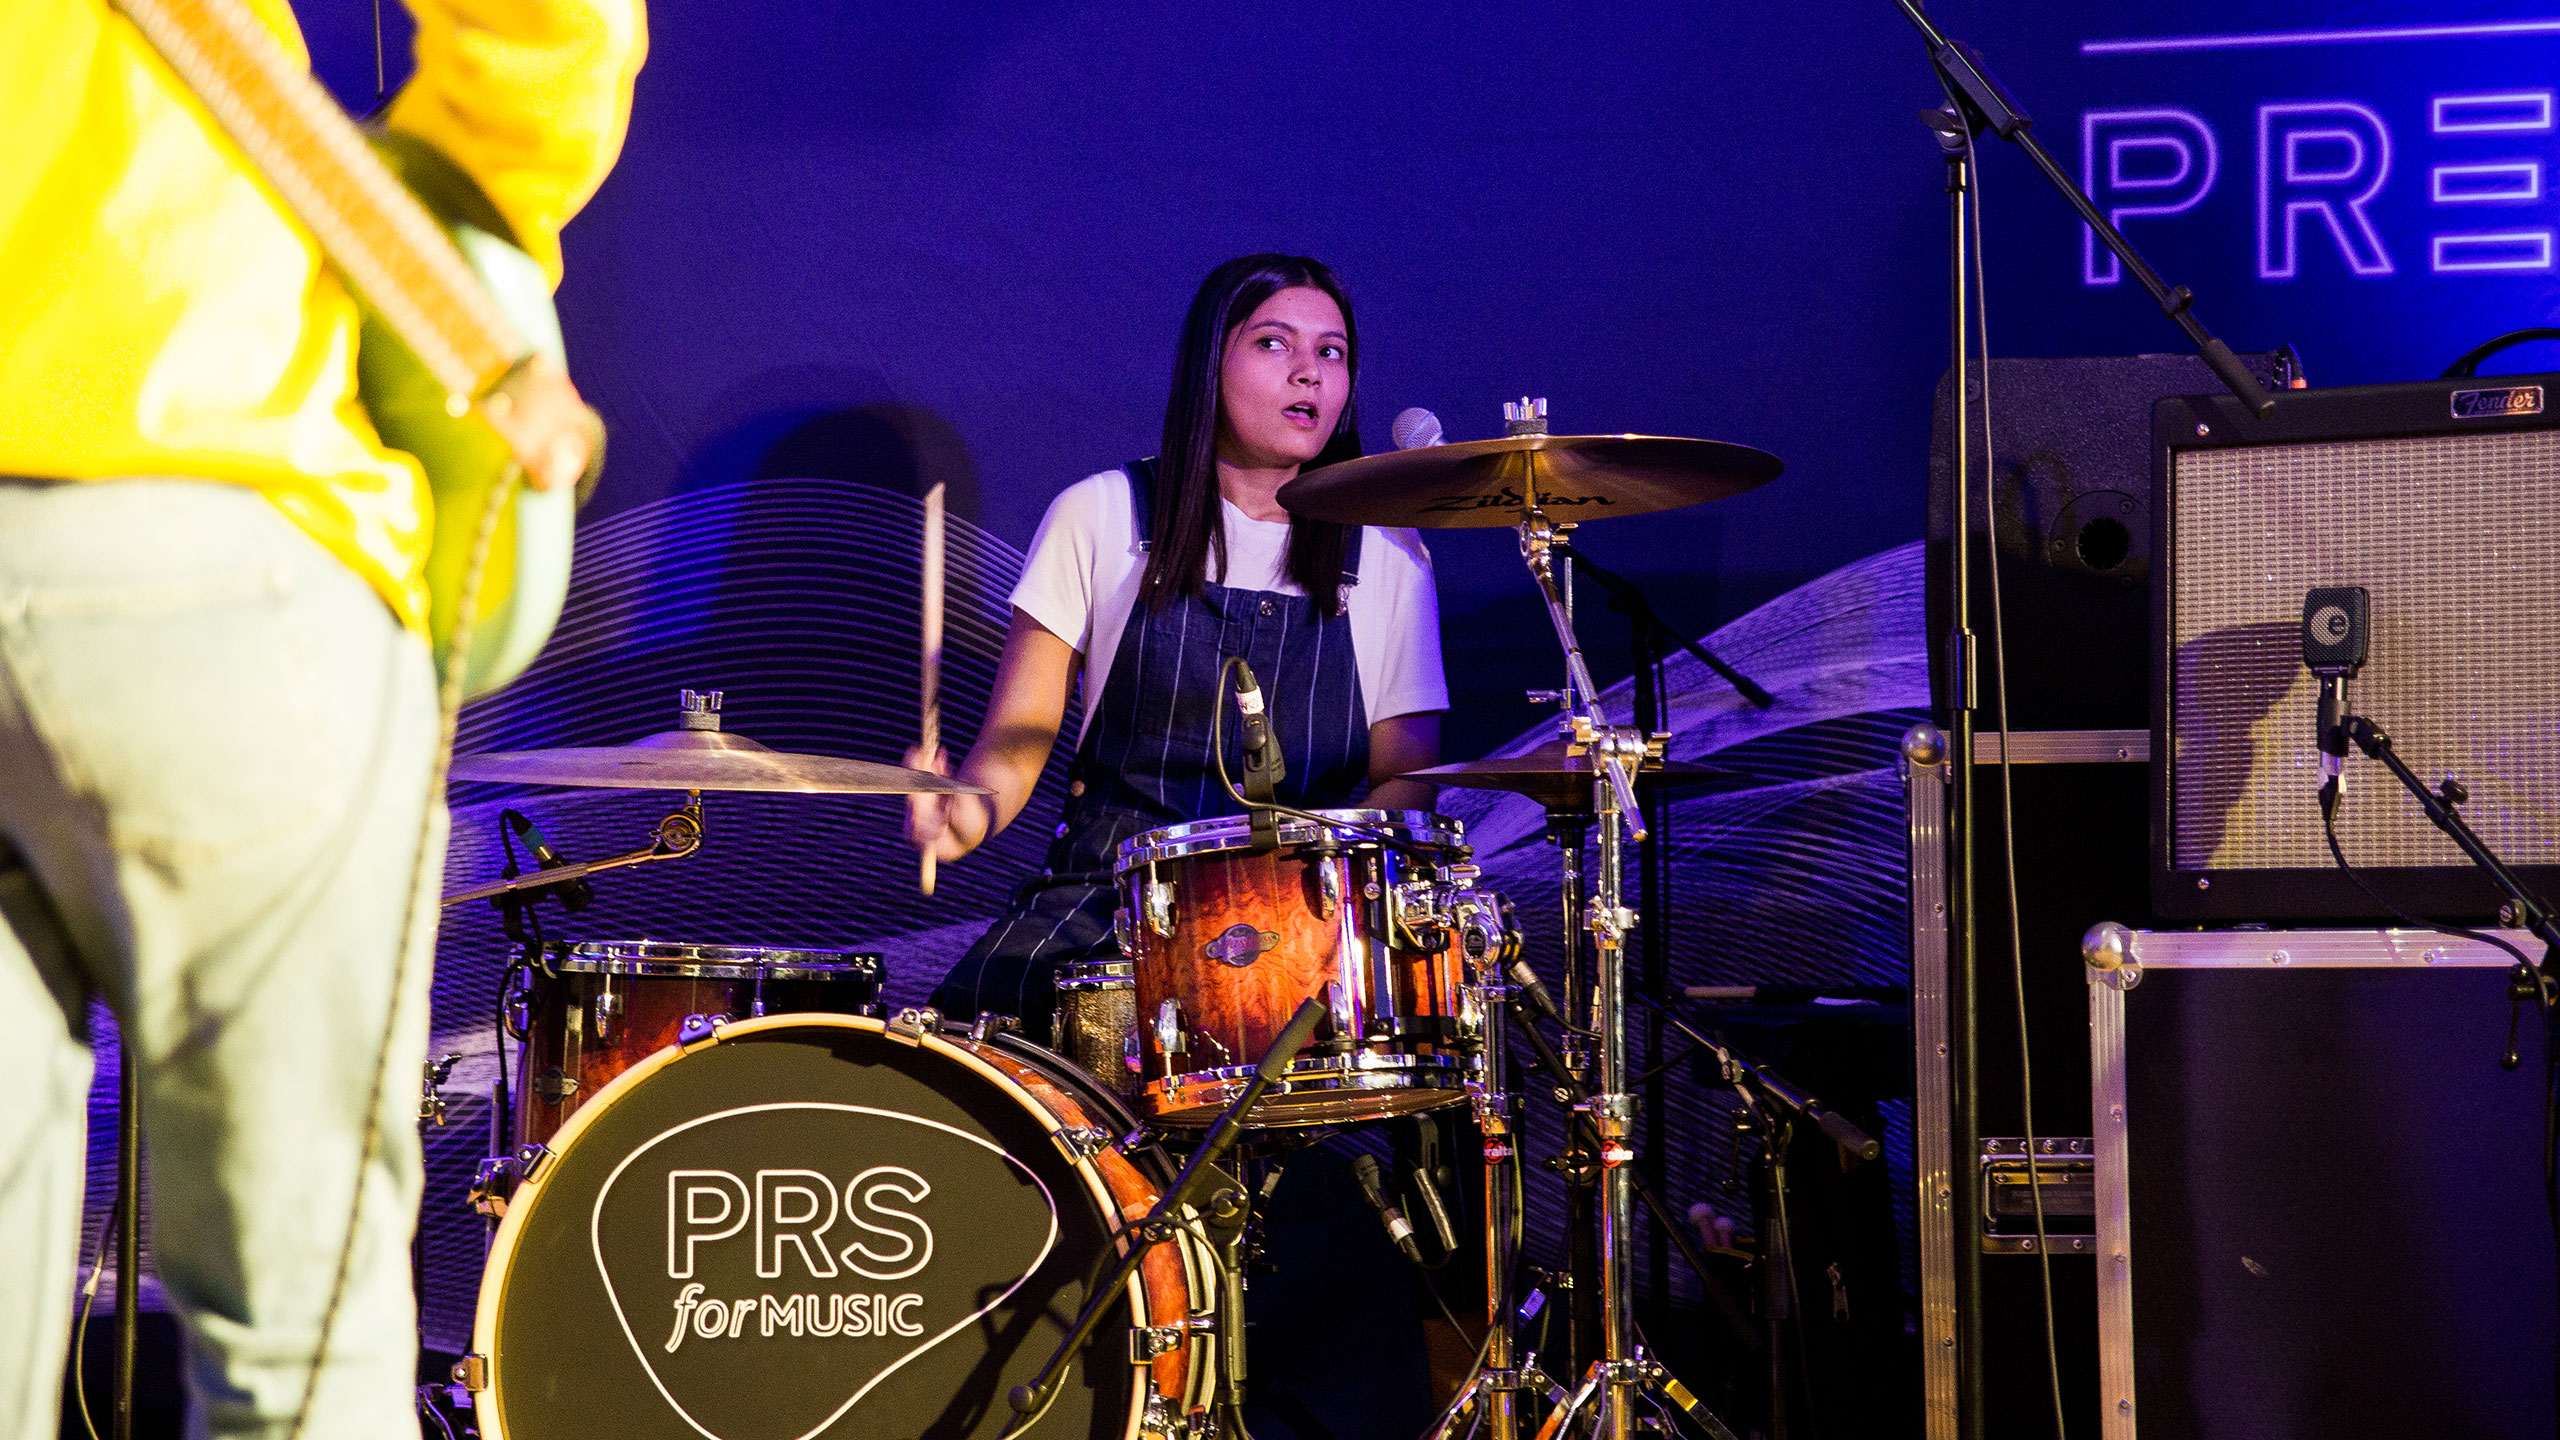 Marika Hackman's drummer, wearing a white t shirt and dungarees, looks up whilst playing live at PRS for Music Presents